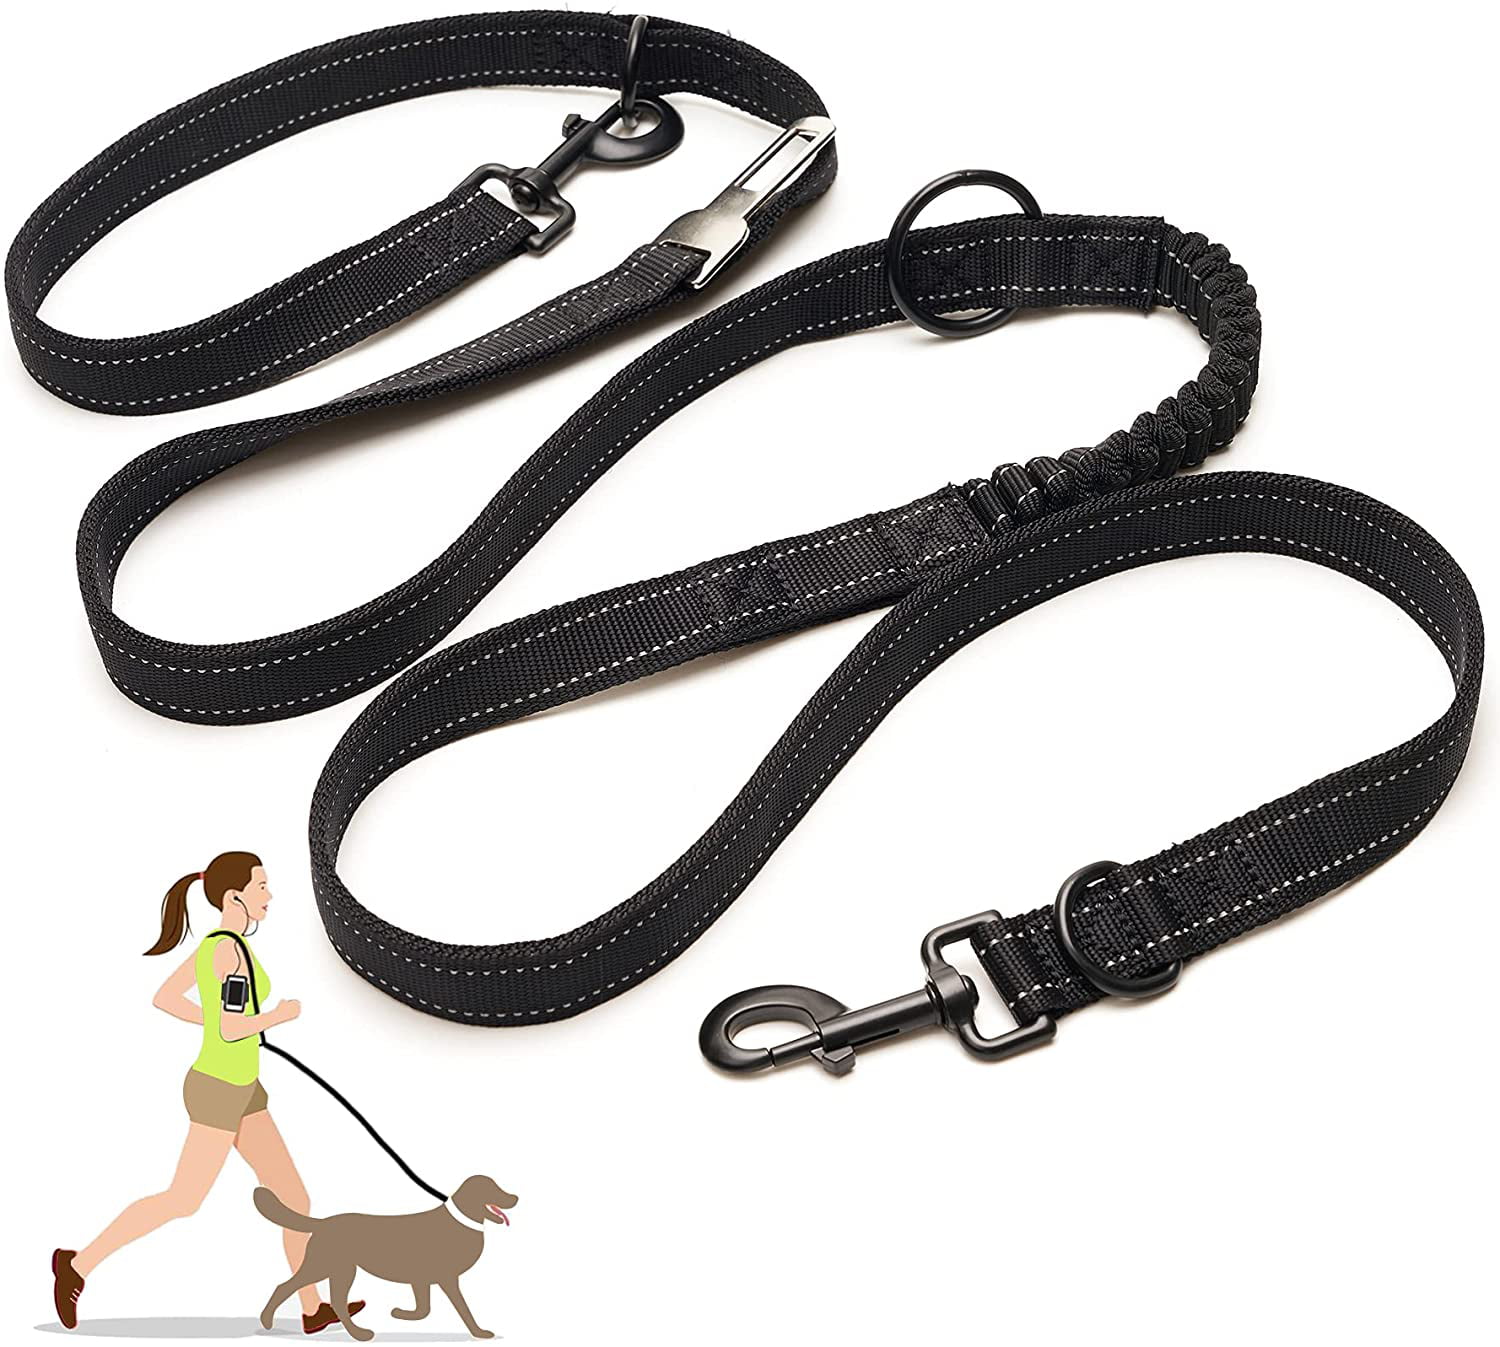 Multi-functional Dog Leash Adjustable Rope Durable Nylon Reflective Material Pet Leash for Walking Training Running 2 dogs to 3 different sizes S:0.6“Width,3.6Ft-6.6Ft, Orange 